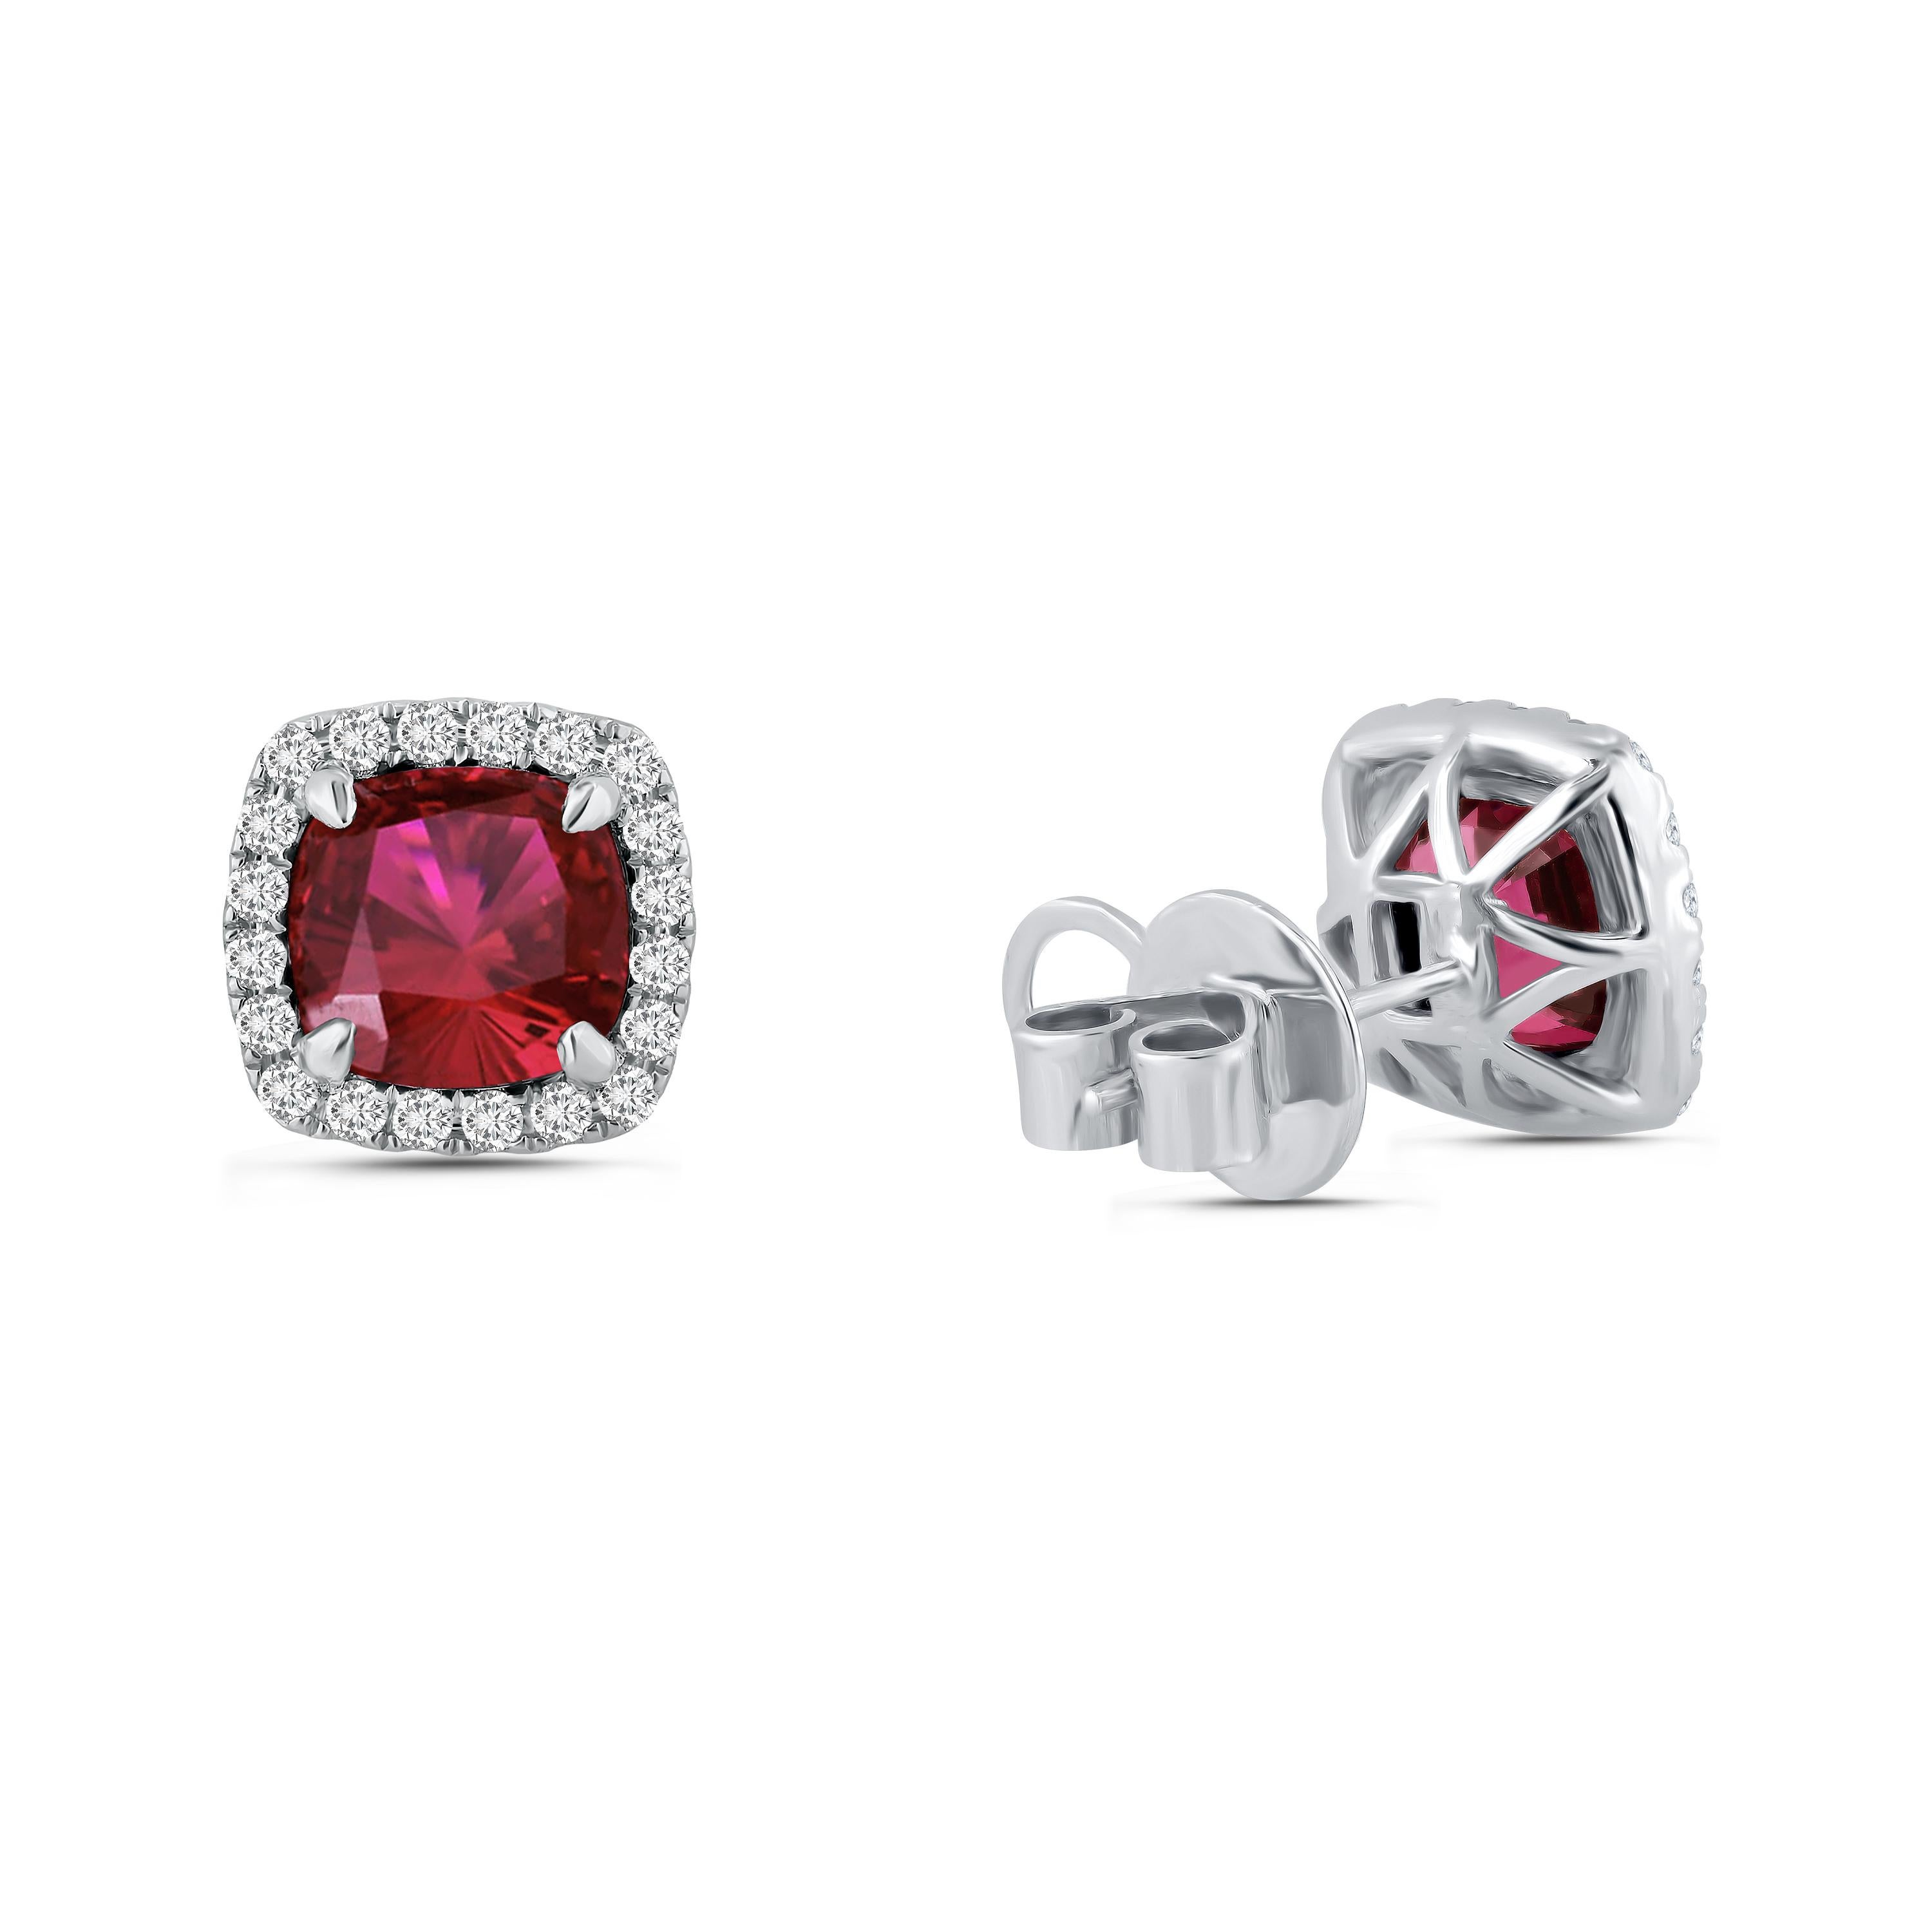 Introducing a pair of stud earrings that redefine the meaning of elegance and sophistication. These exquisite earrings are adorned with stunning 7.29 carats of cushion-cut garnet centers, their deep and alluring red hues exuding a sense of timeless